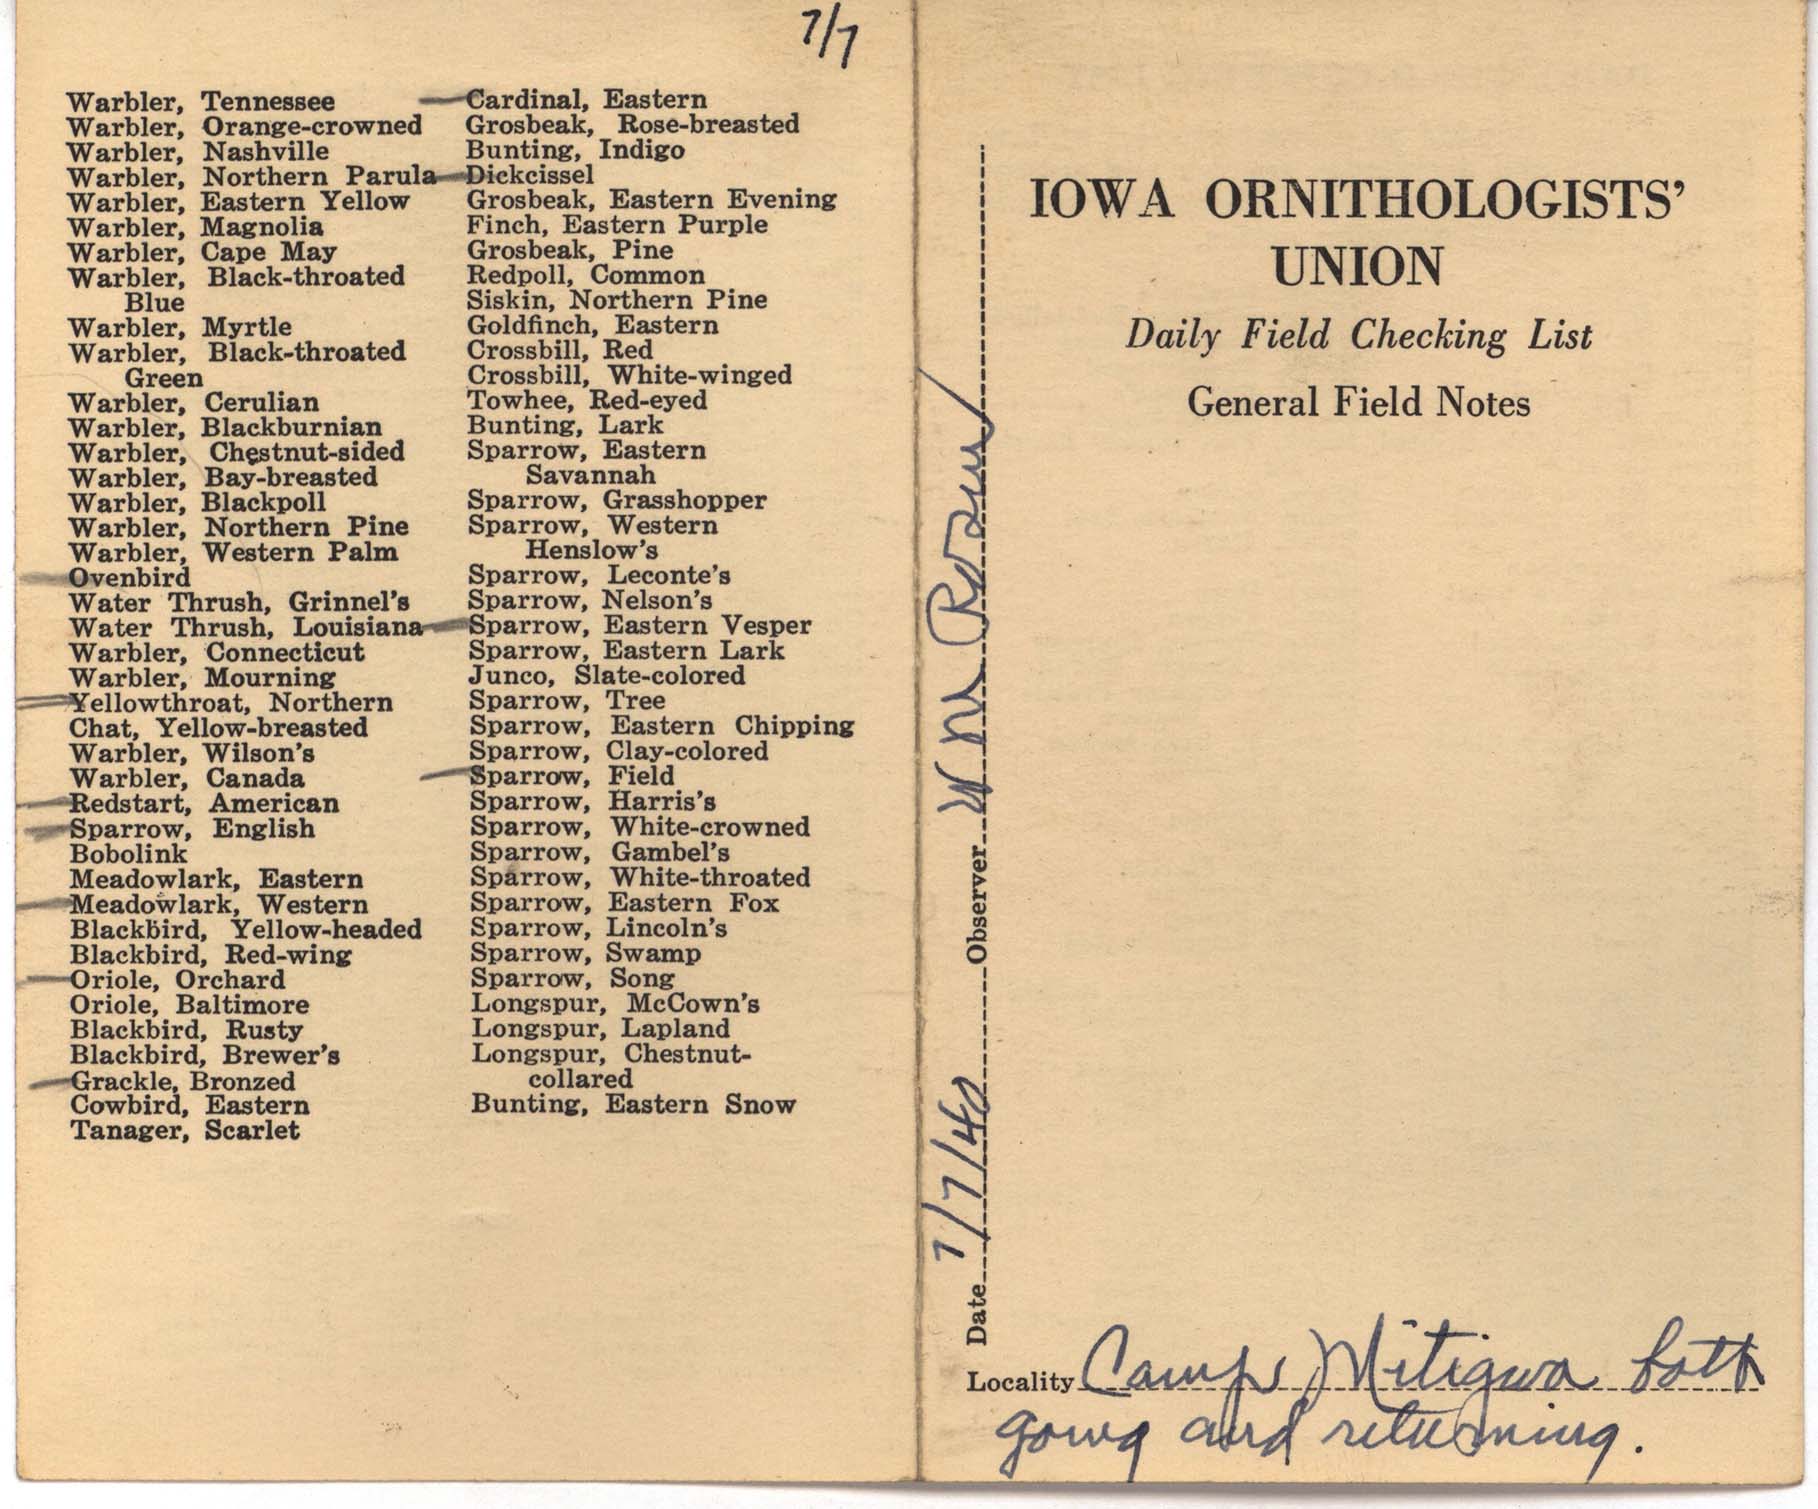 Daily field checking list by Walter Rosene, July 7, 1940